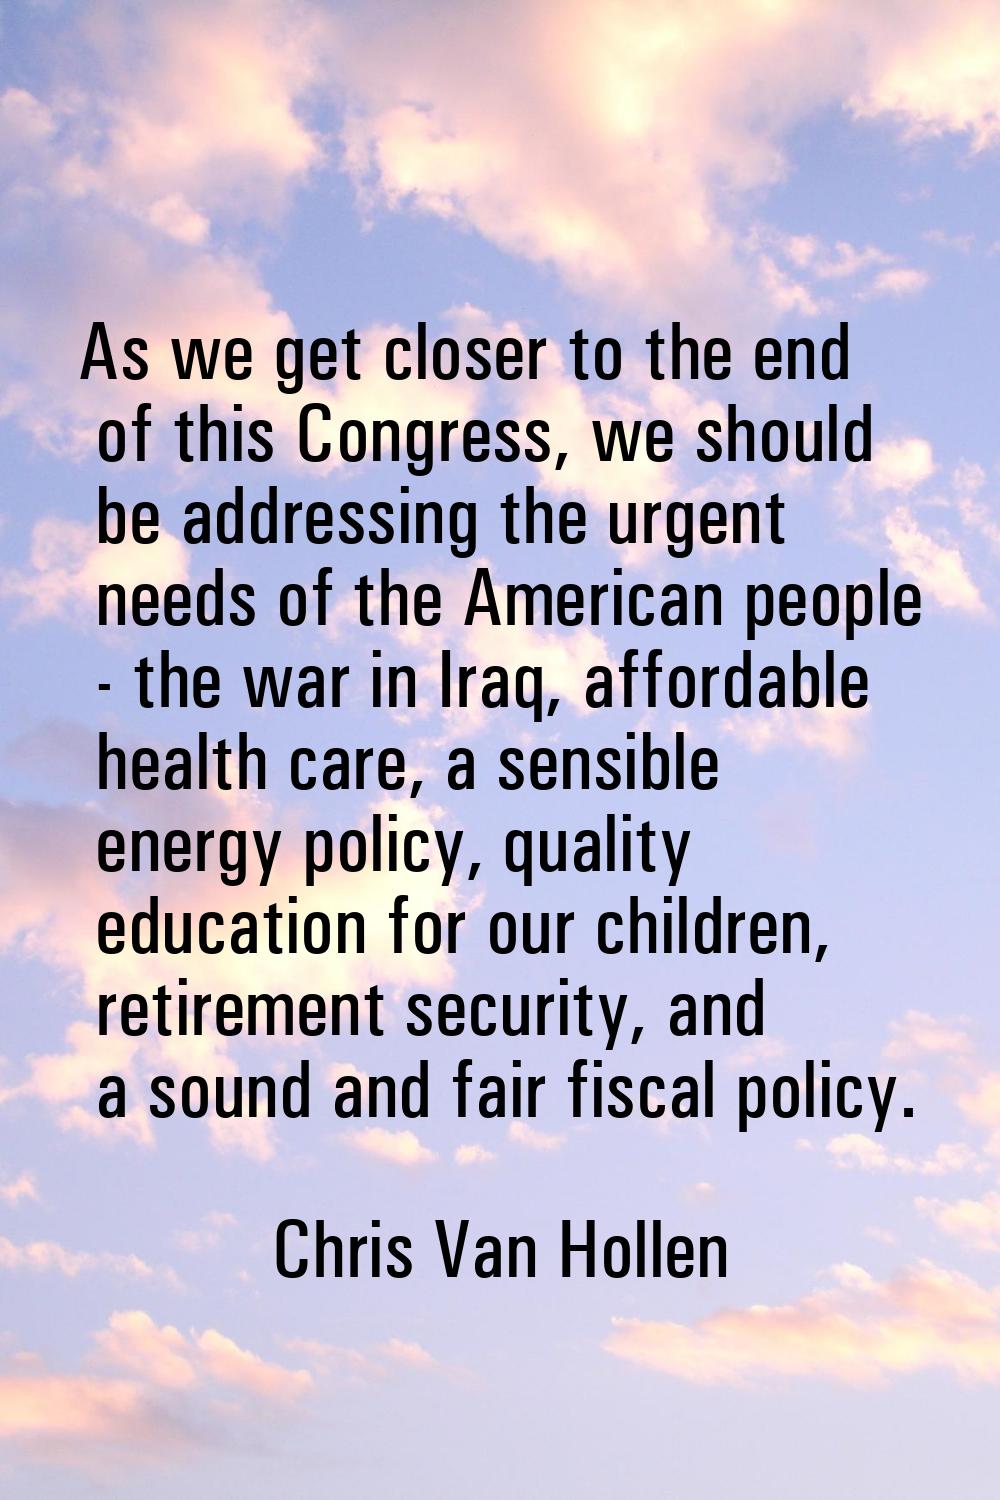 As we get closer to the end of this Congress, we should be addressing the urgent needs of the Ameri